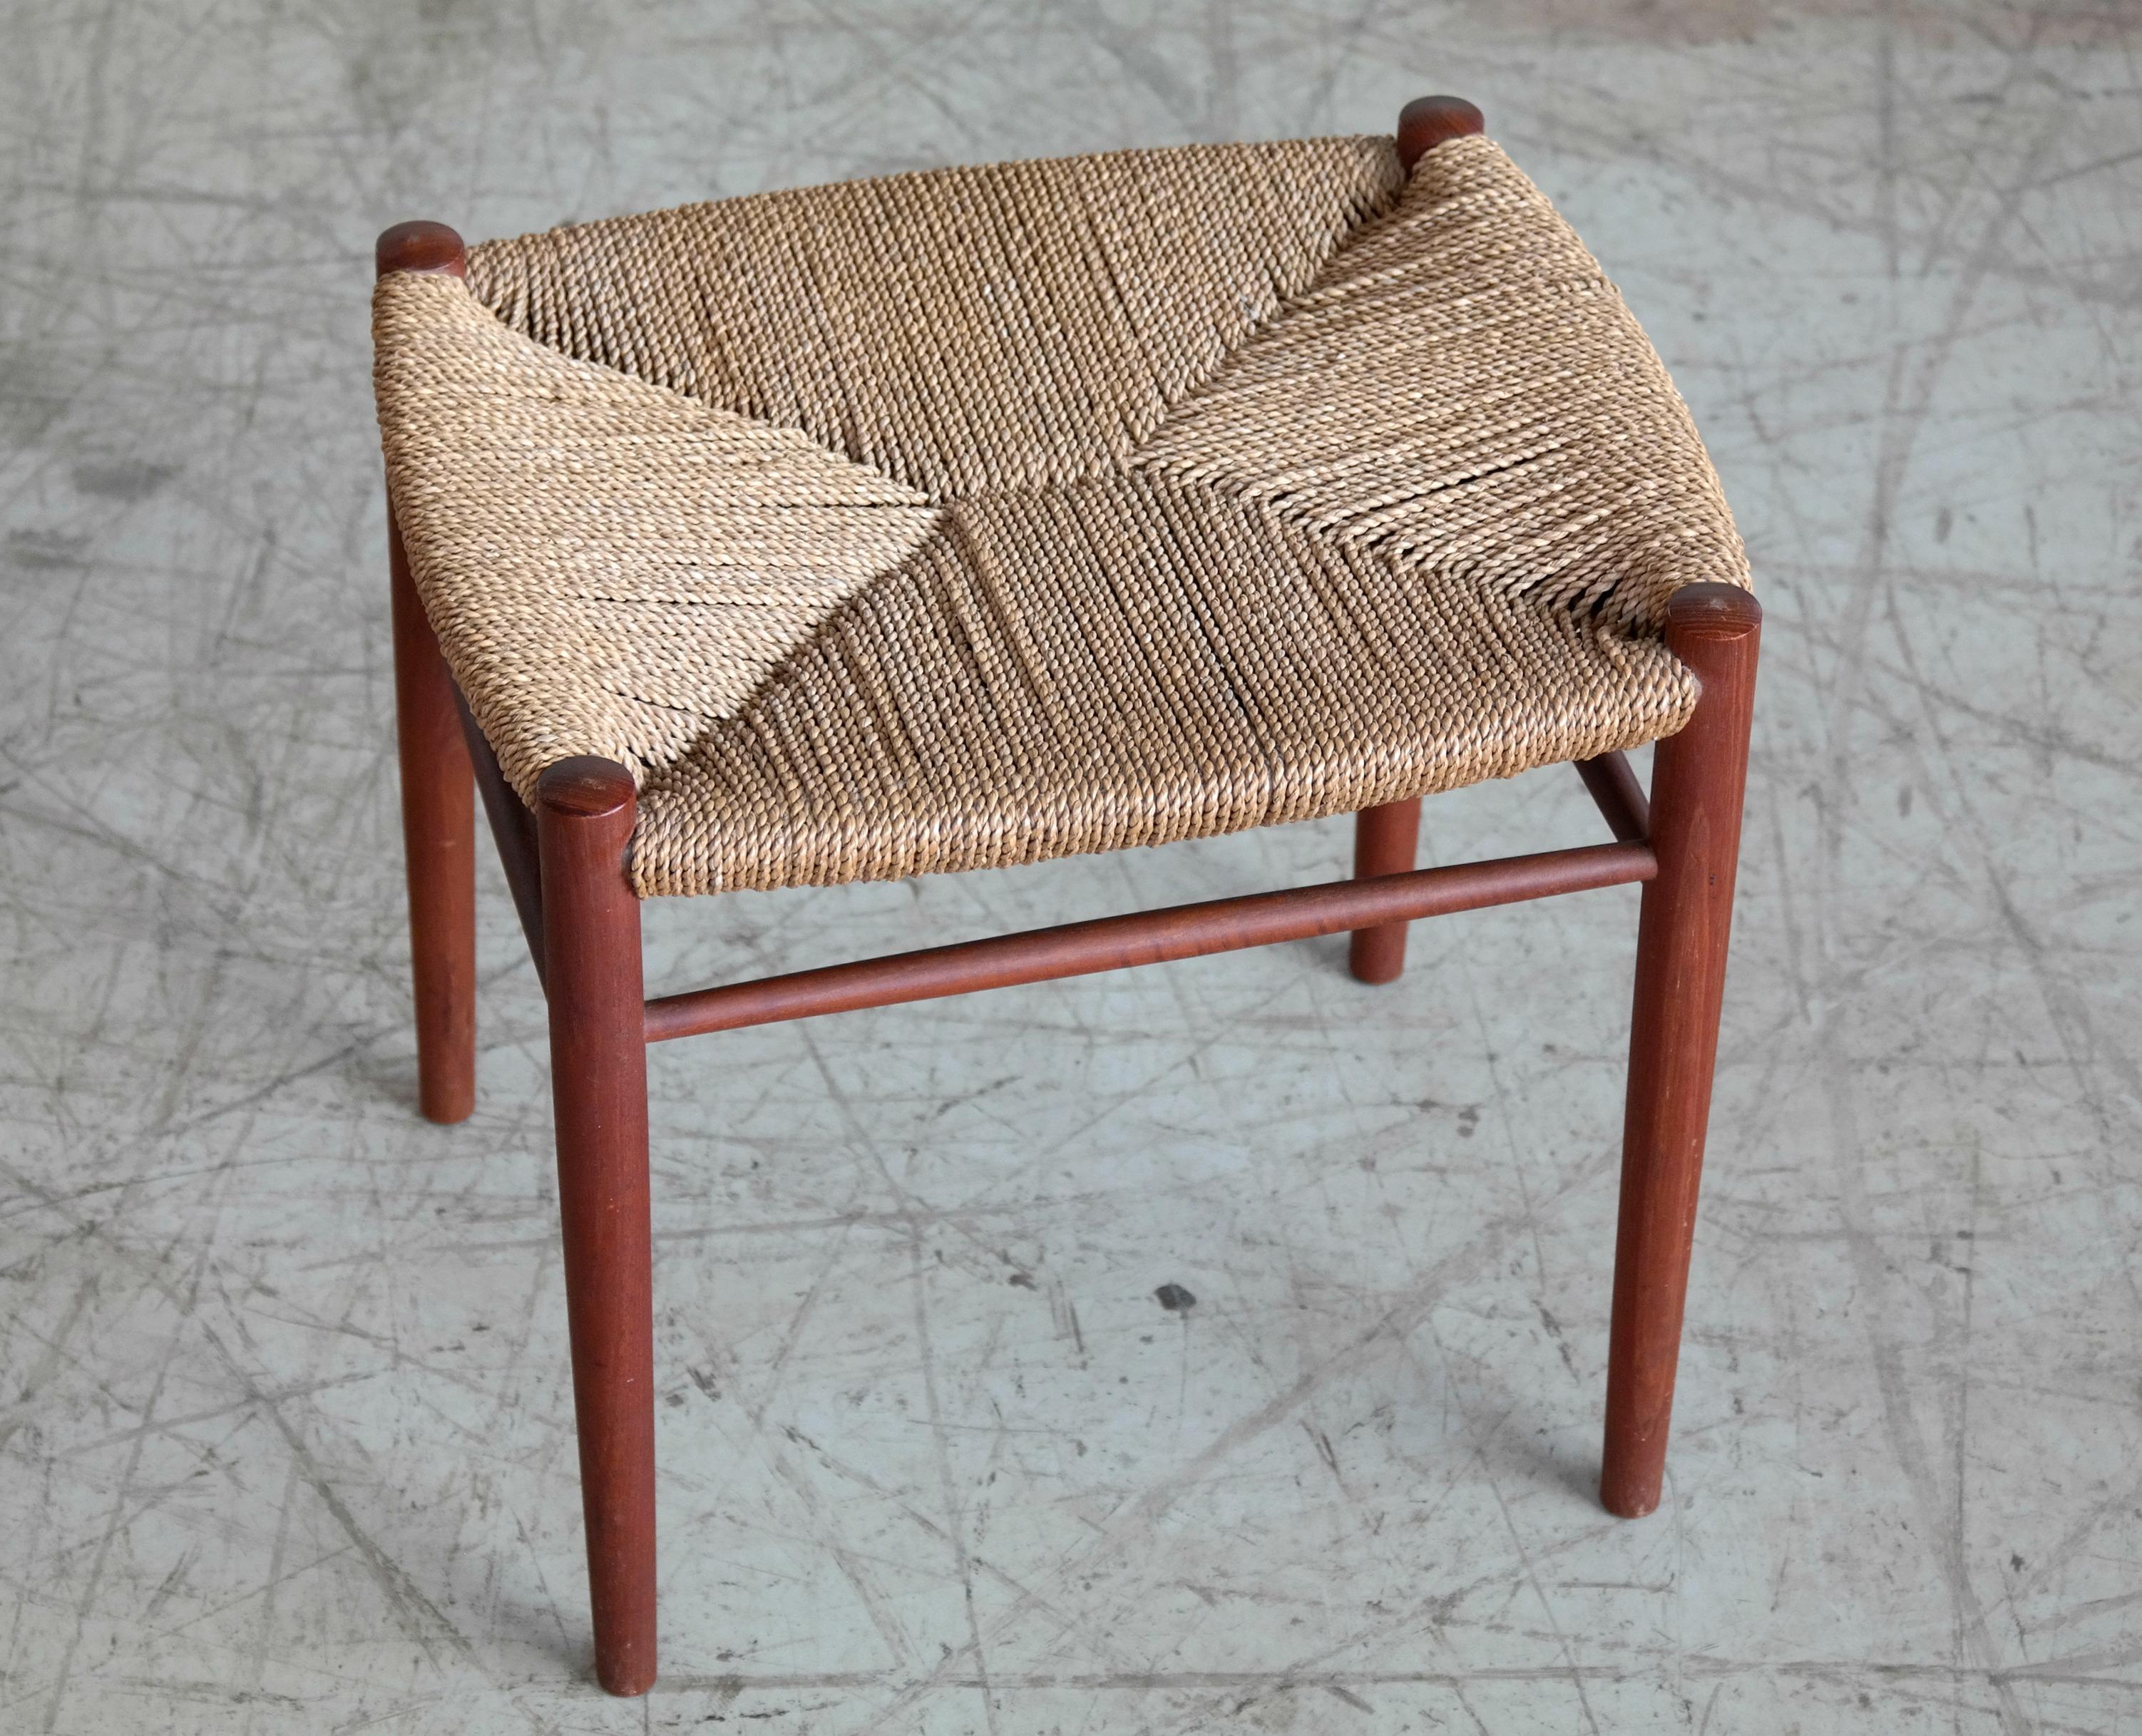 Beautiful classic Danish midcentury vanity stool in solid teak with a rush seat of spun paper cord. Made sometime in the 1950s in Denmark designer and maker unknown. Nice silhouette and paper cord in very good condition with no breaks or repairs.